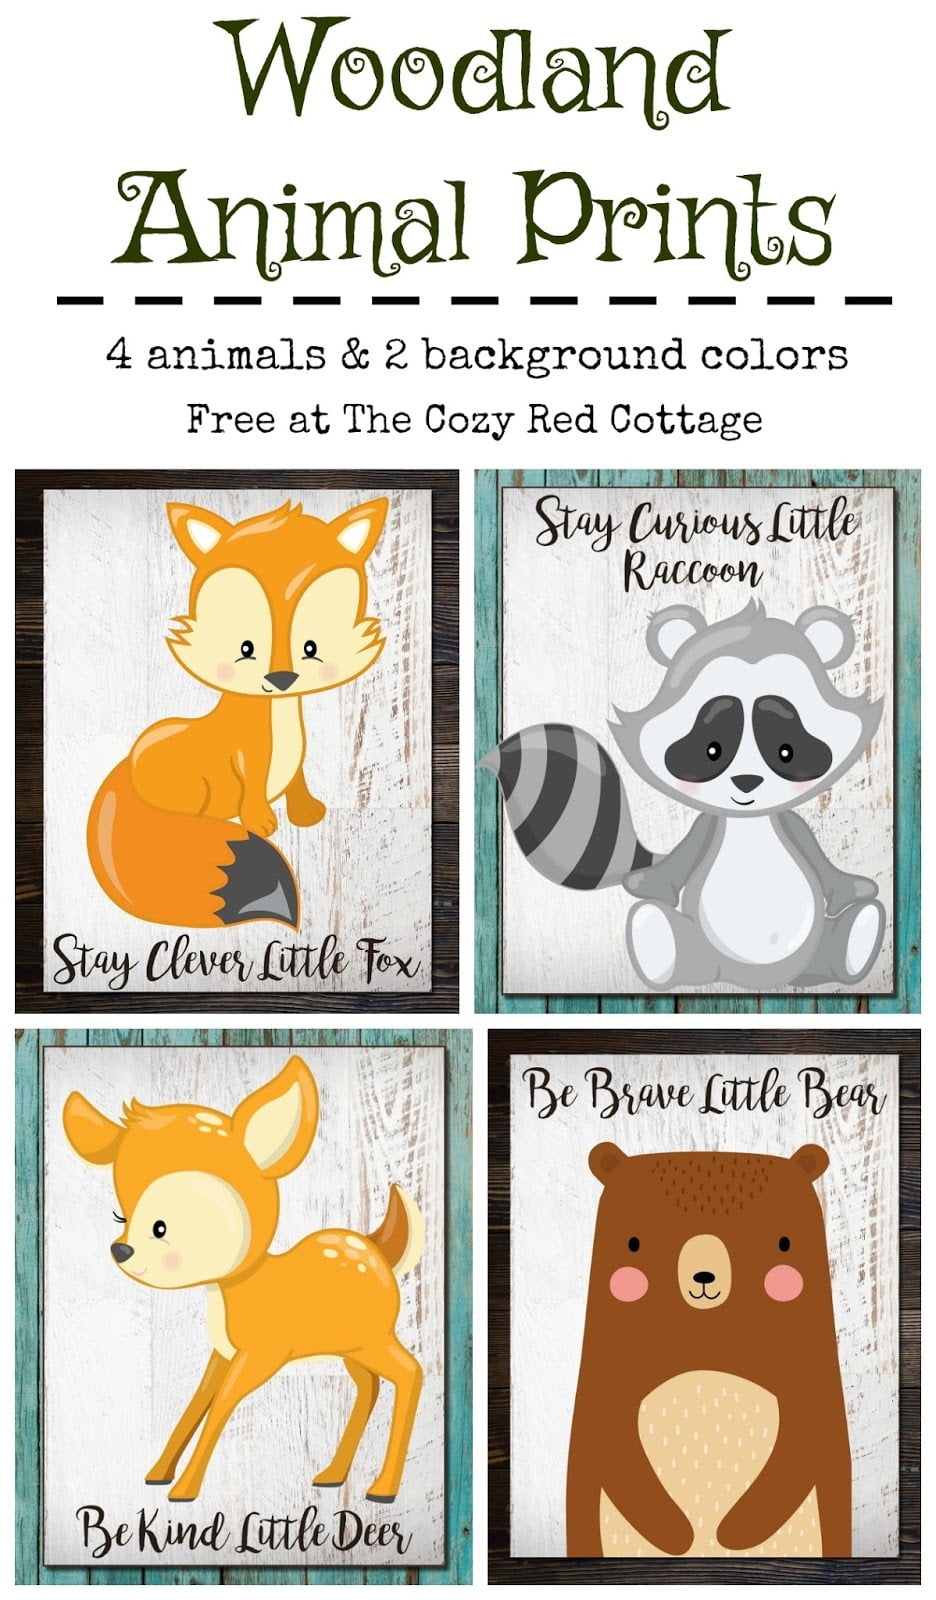 The Cozy Red Cottage Free Woodland Animal Prints